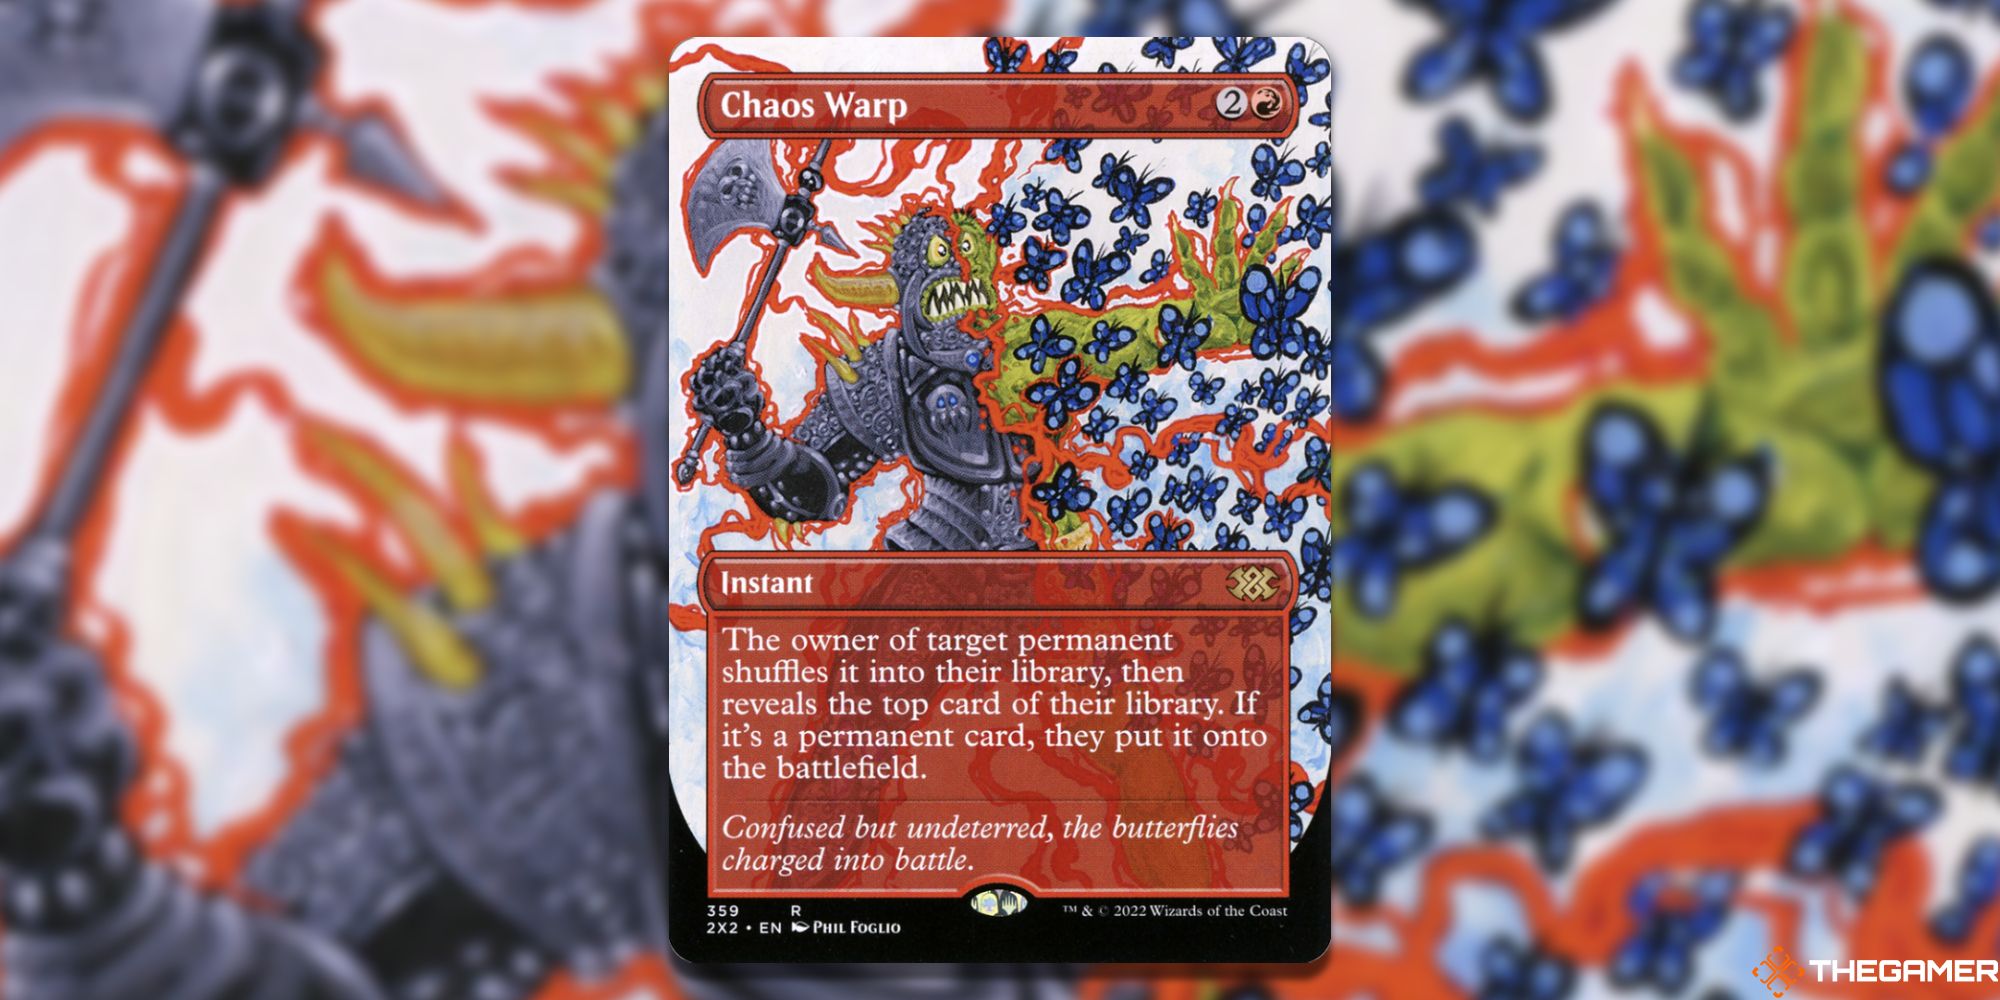 The card Chaos Warp from Magic: The Gathering.